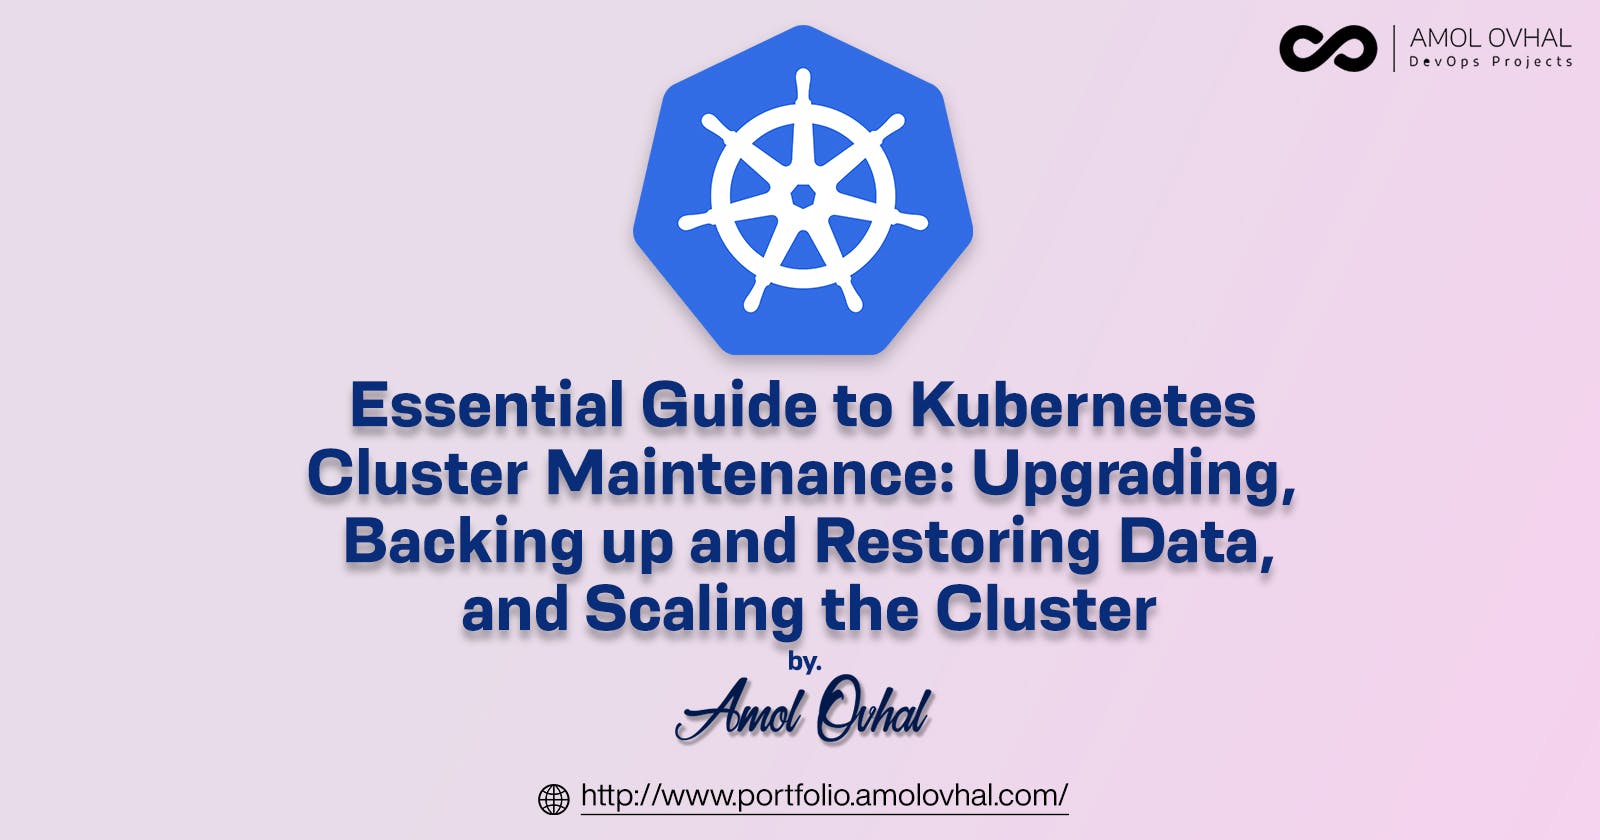 Essential Guide to Kubernetes Cluster Maintenance